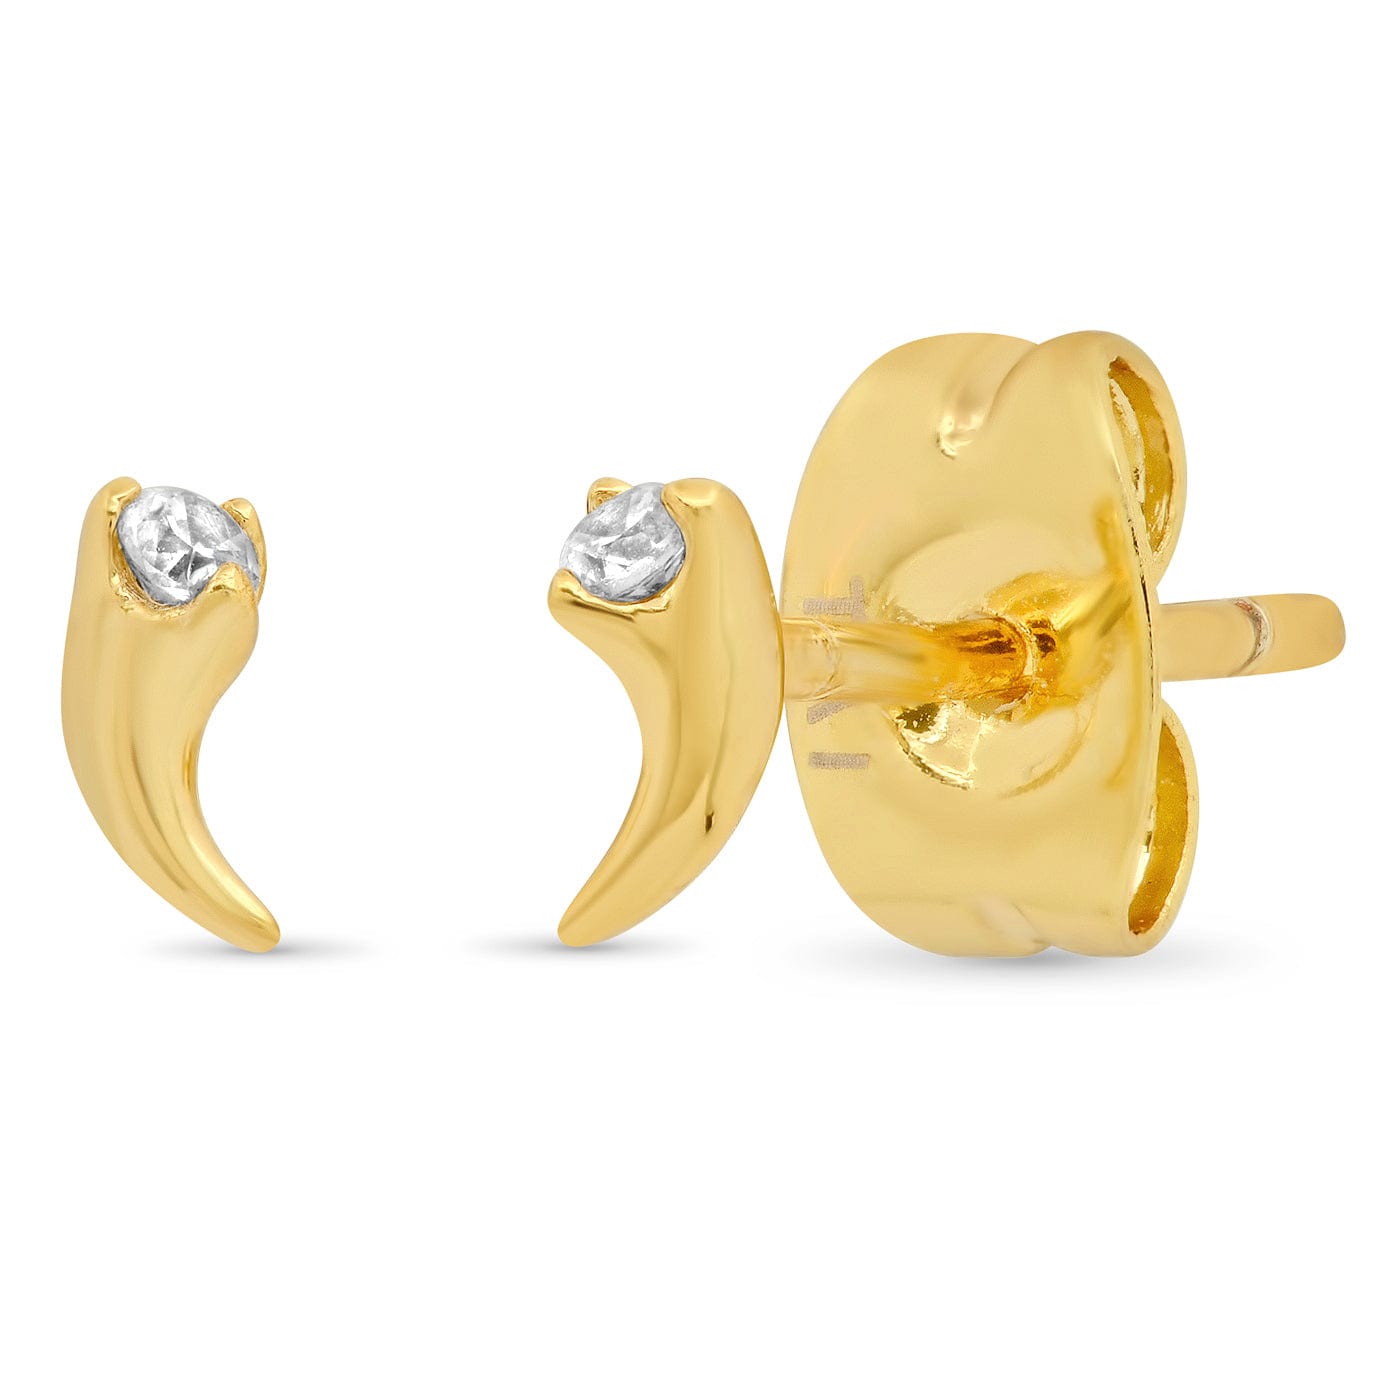 TAI JEWELRY Earrings Small Horn With Single Cz Accent